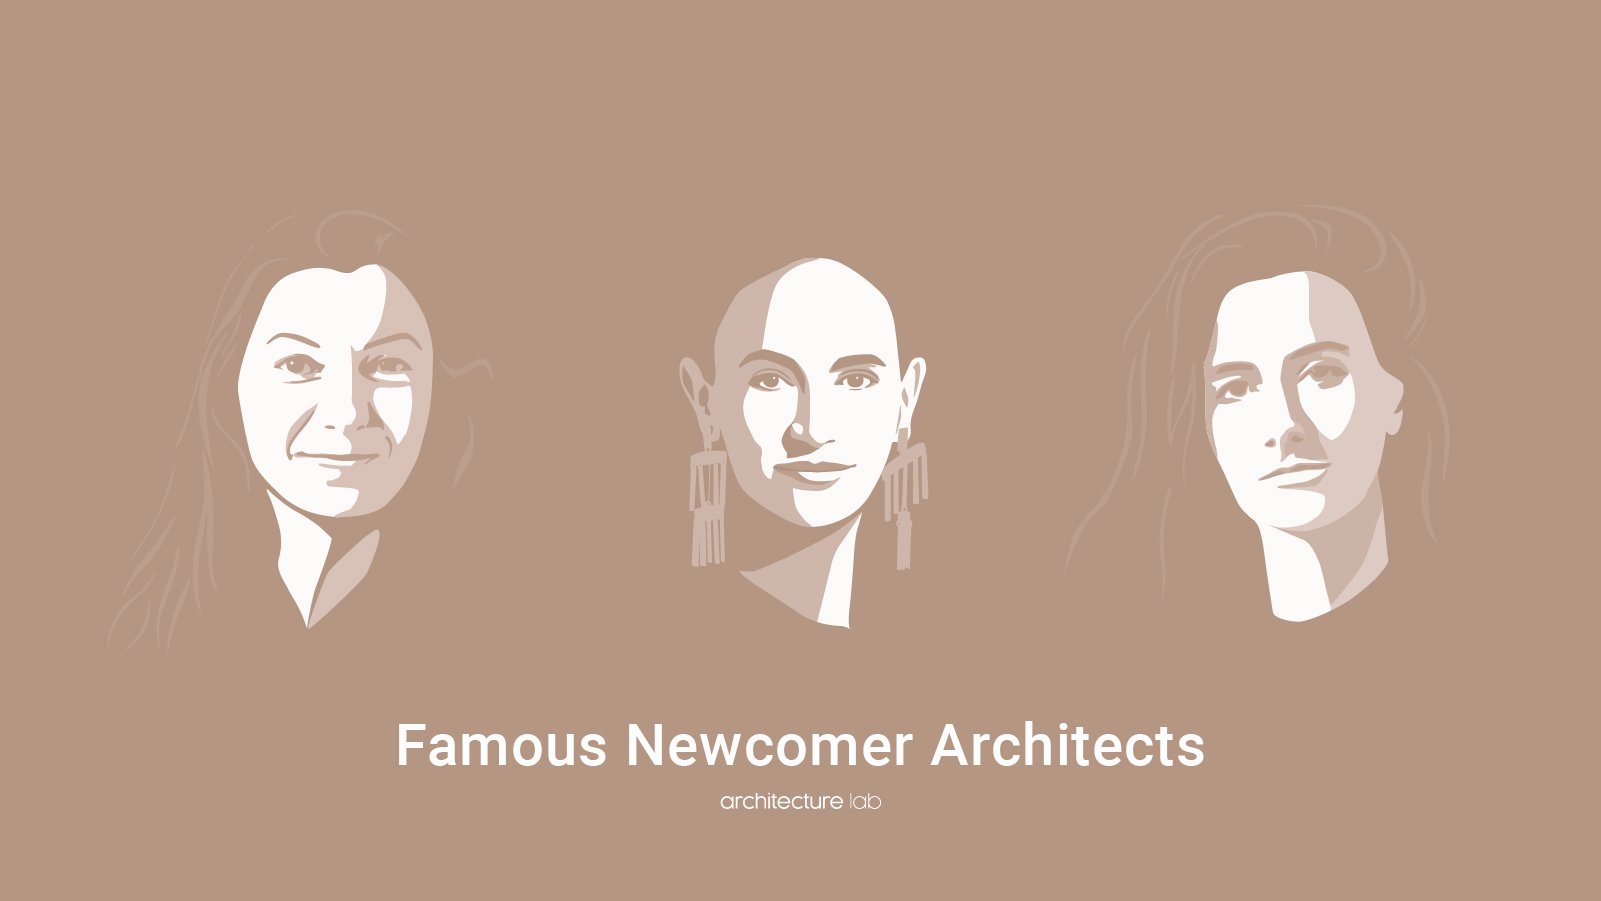 10 famous newcomer architects and their proud works